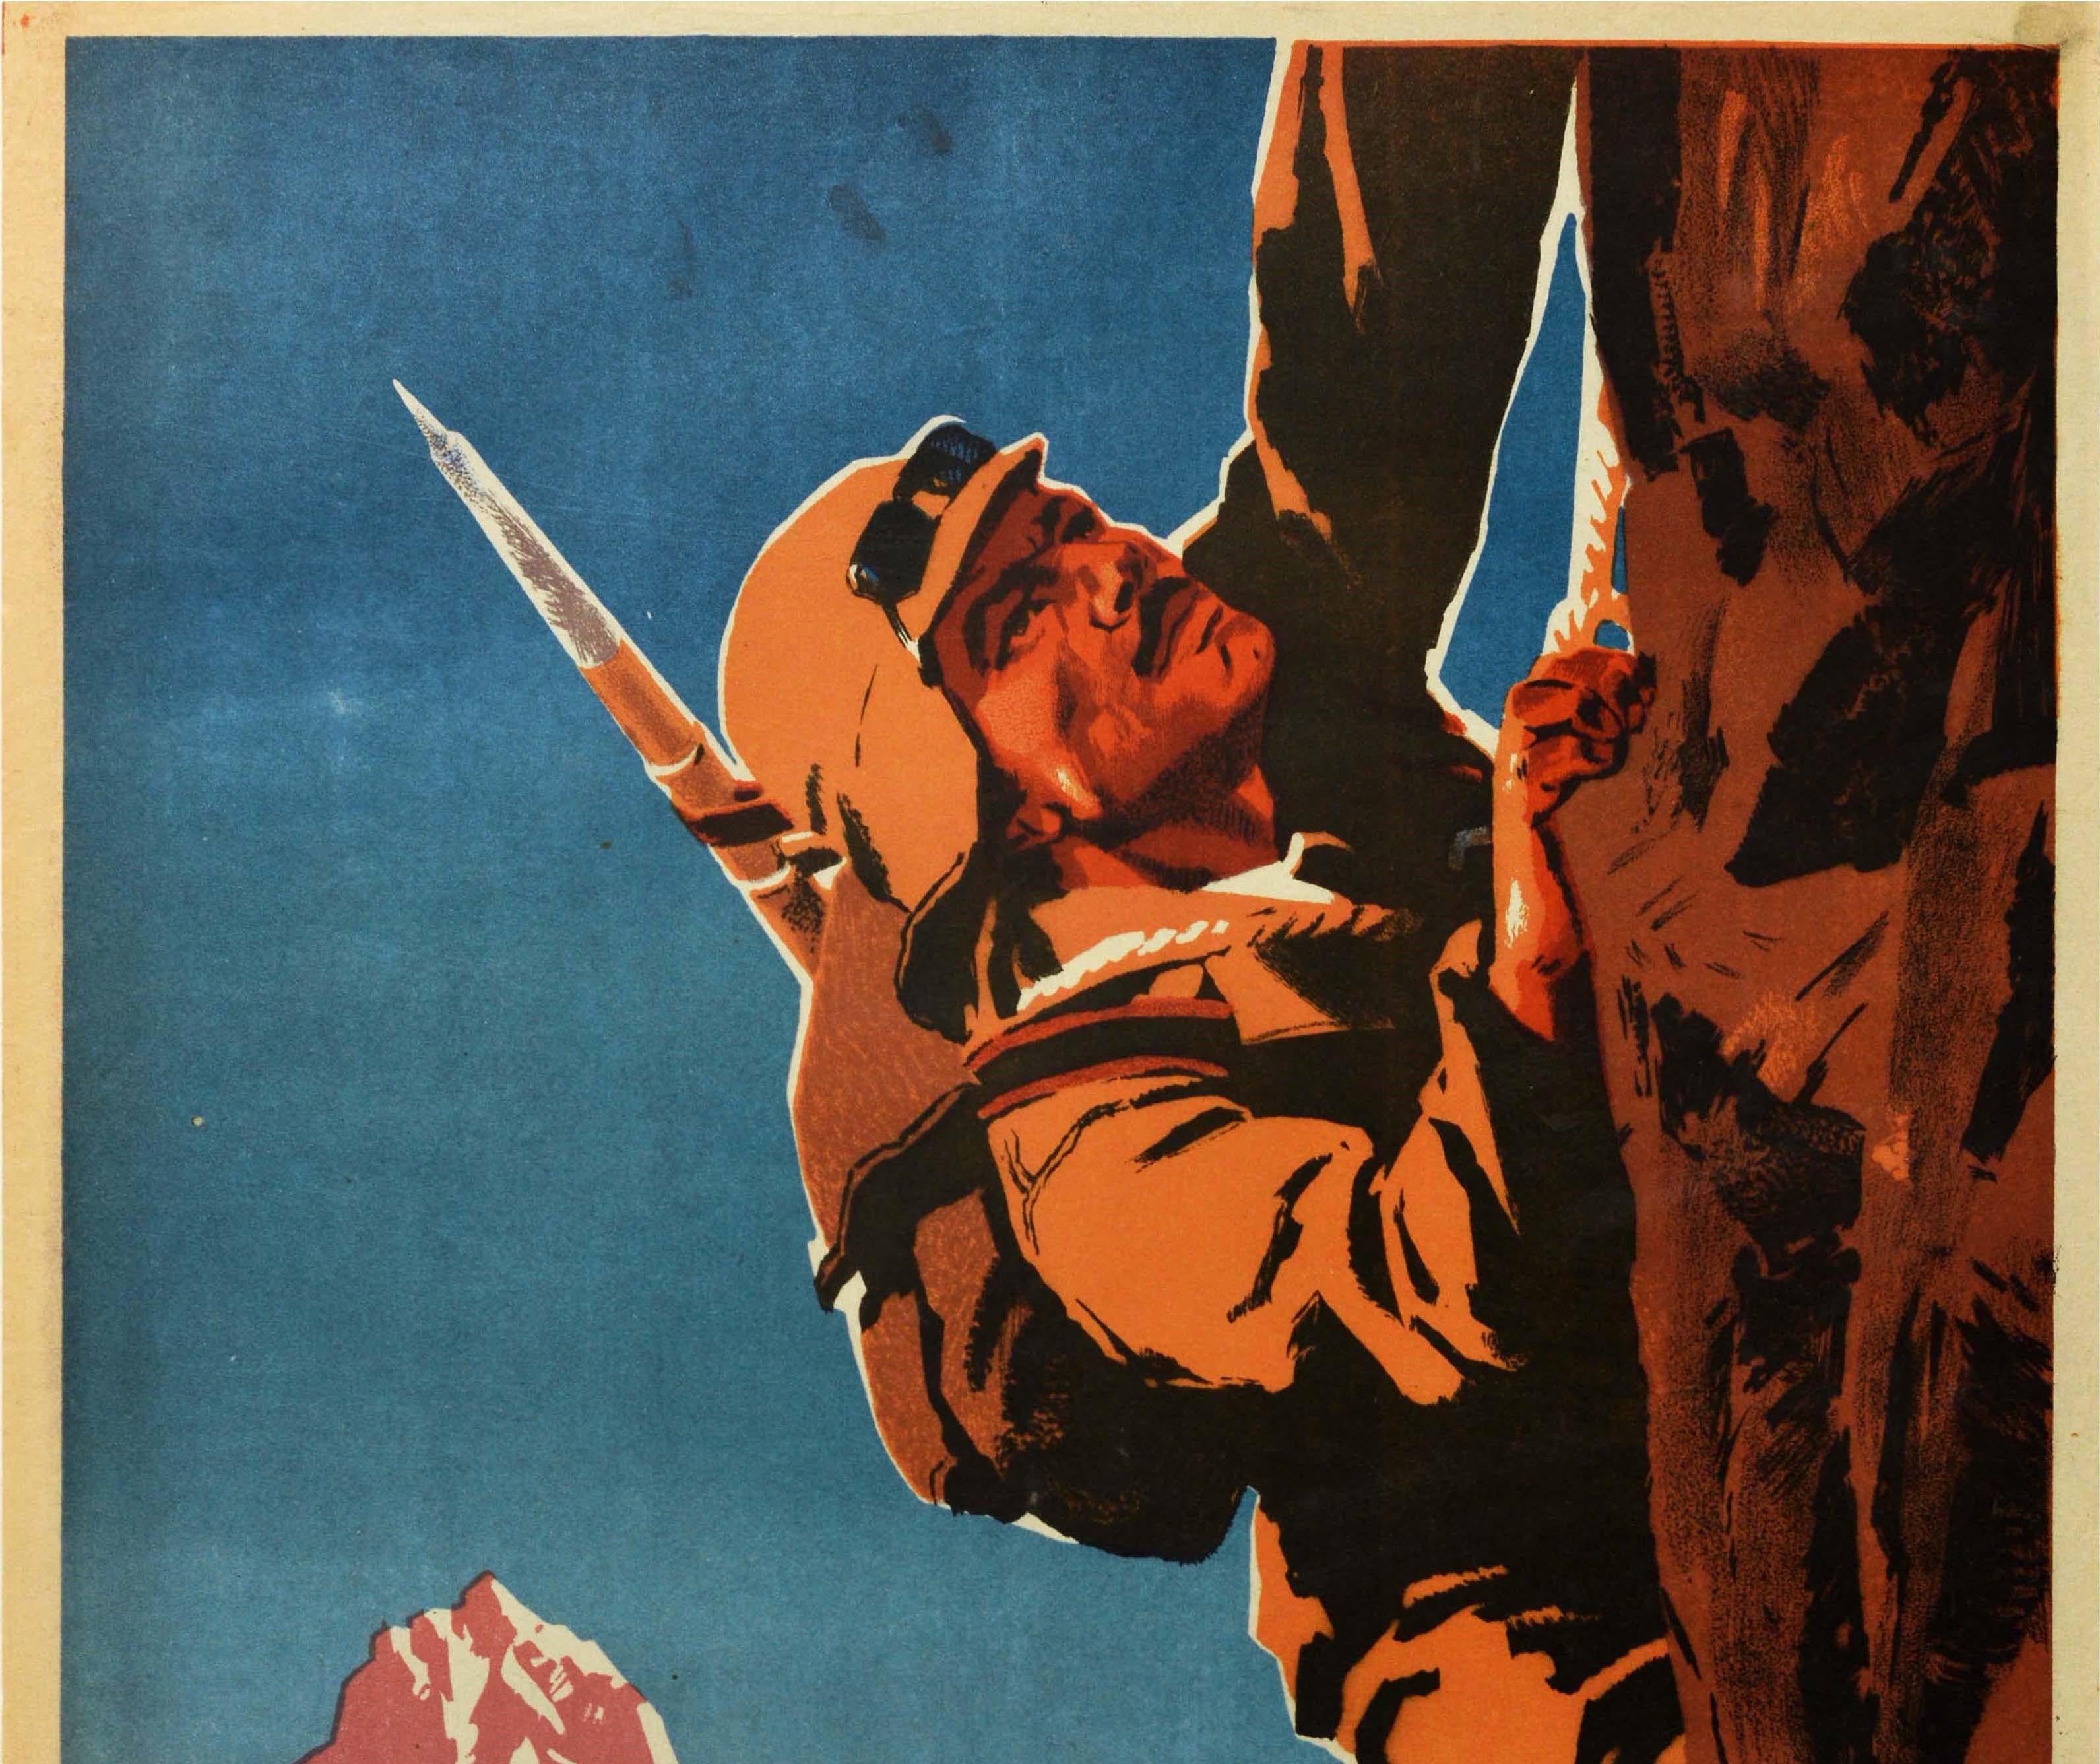 Original vintage movie poster for the Russian issue of a Georgian war drama action film Mtsvervalta dampkrobni / ?????????? ?????? / Mountain Peak Conquerors directed by David Rondeli featuring a dynamic image of a man in a brown military uniform